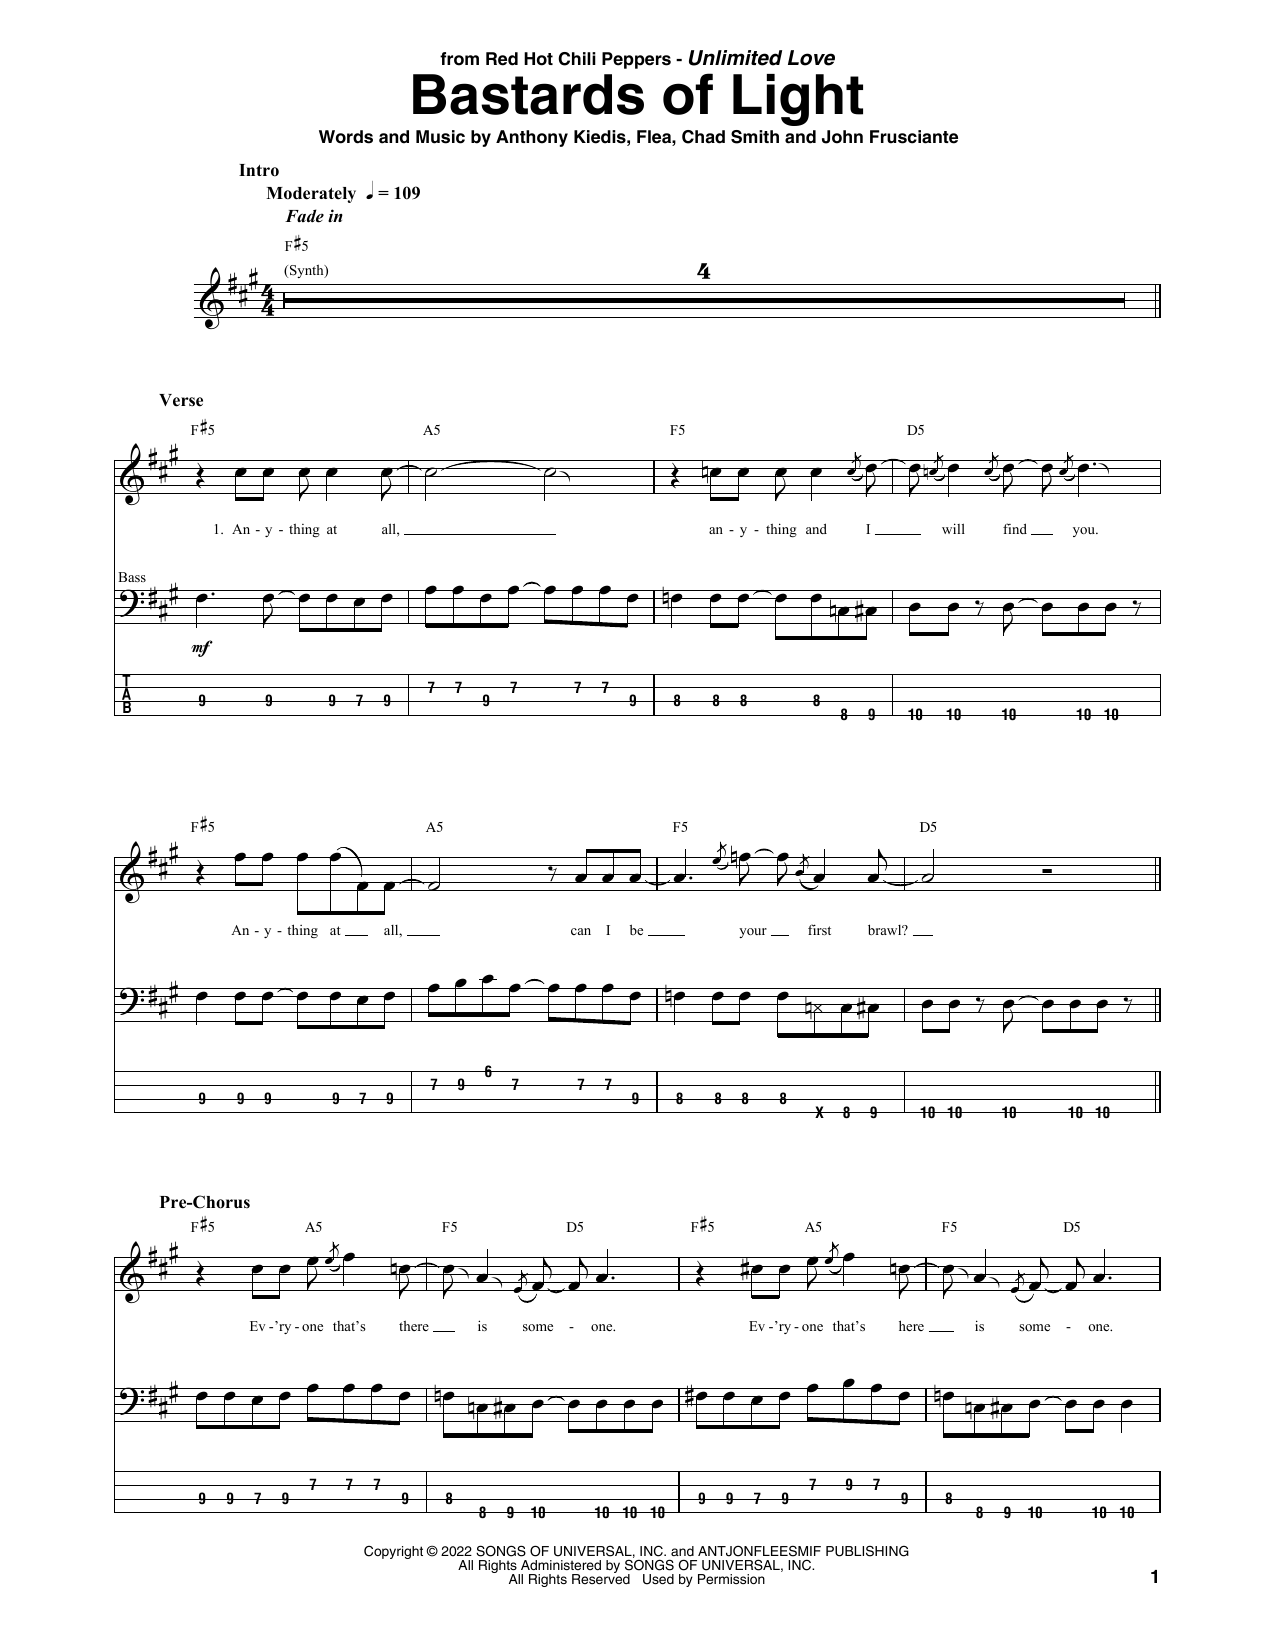 Download Red Hot Chili Peppers Bastards Of Light Sheet Music